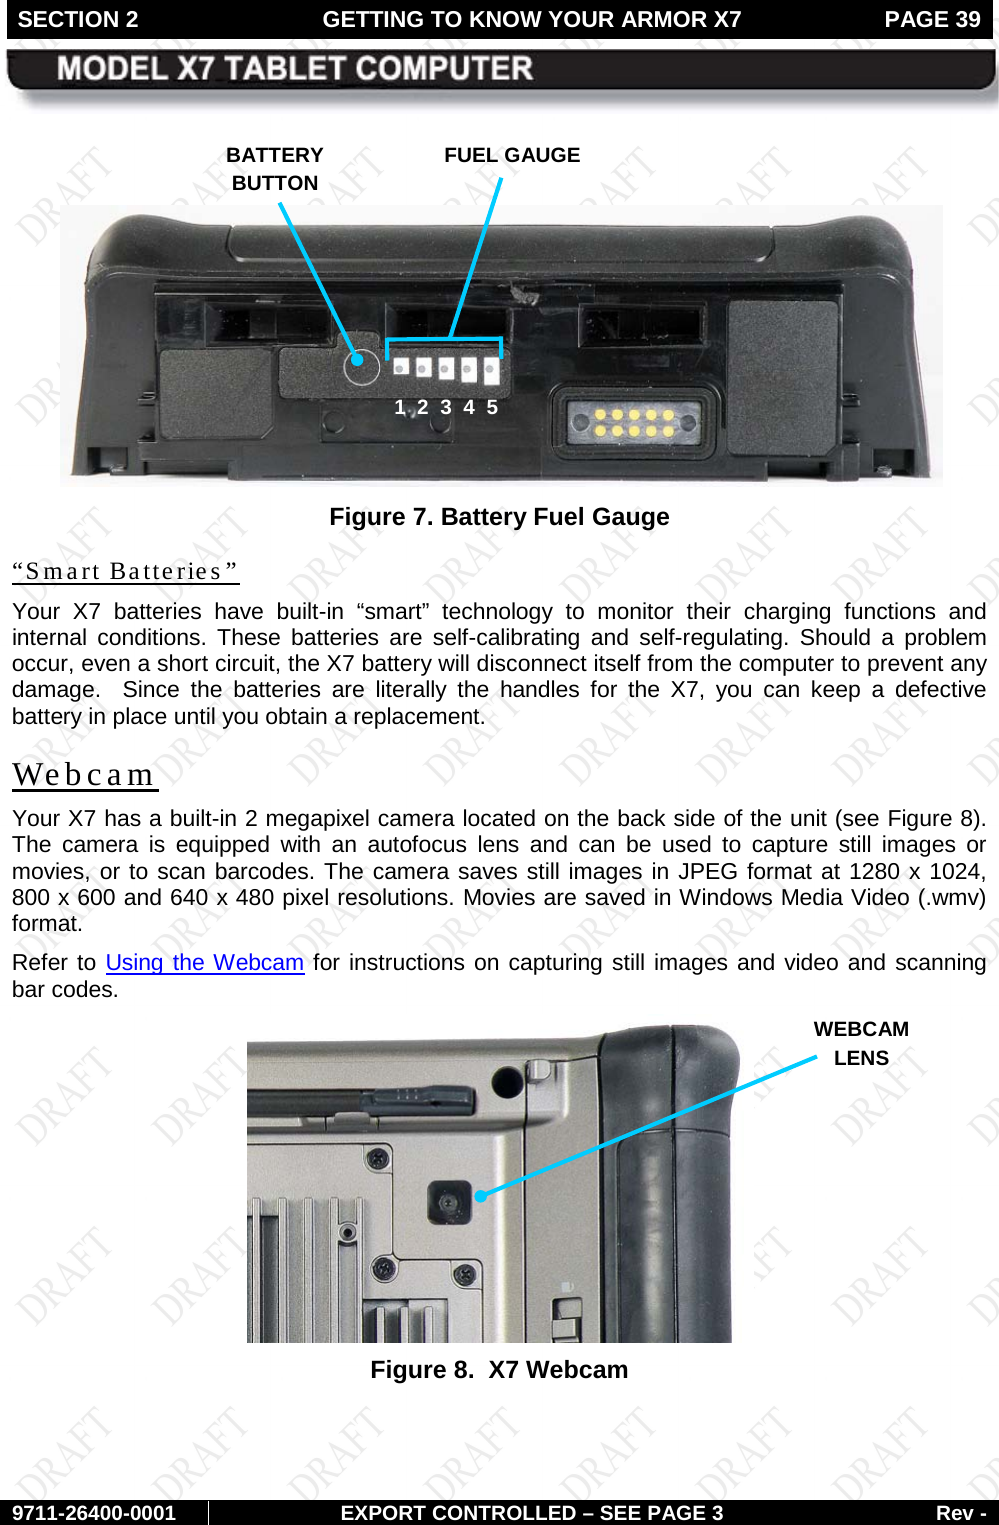 SECTION 2 GETTING TO KNOW YOUR ARMOR X7  PAGE 39        9711-26400-0001 EXPORT CONTROLLED – SEE PAGE 3 Rev -    Figure 7. Battery Fuel Gauge “Smart Batteries” Your X7 batteries have built-in “smart” technology to monitor their charging functions and internal conditions. These batteries are self-calibrating and self-regulating. Should a problem occur, even a short circuit, the X7 battery will disconnect itself from the computer to prevent any damage.  Since the batteries are literally the handles for the X7, you can keep a defective battery in place until you obtain a replacement. Webcam Your X7 has a built-in 2 megapixel camera located on the back side of the unit (see Figure 8). The camera is equipped with an autofocus lens and can be used to capture still images or movies, or to scan barcodes. The camera saves still images in JPEG format at 1280 x 1024, 800 x 600 and 640 x 480 pixel resolutions. Movies are saved in Windows Media Video (.wmv) format.  Refer to Using the Webcam for instructions on capturing still images and video and scanning bar codes.  Figure 8.  X7 Webcam    BATTERY  BUTTON FUEL GAUGE  1  2  3  4  5 WEBCAM LENS 